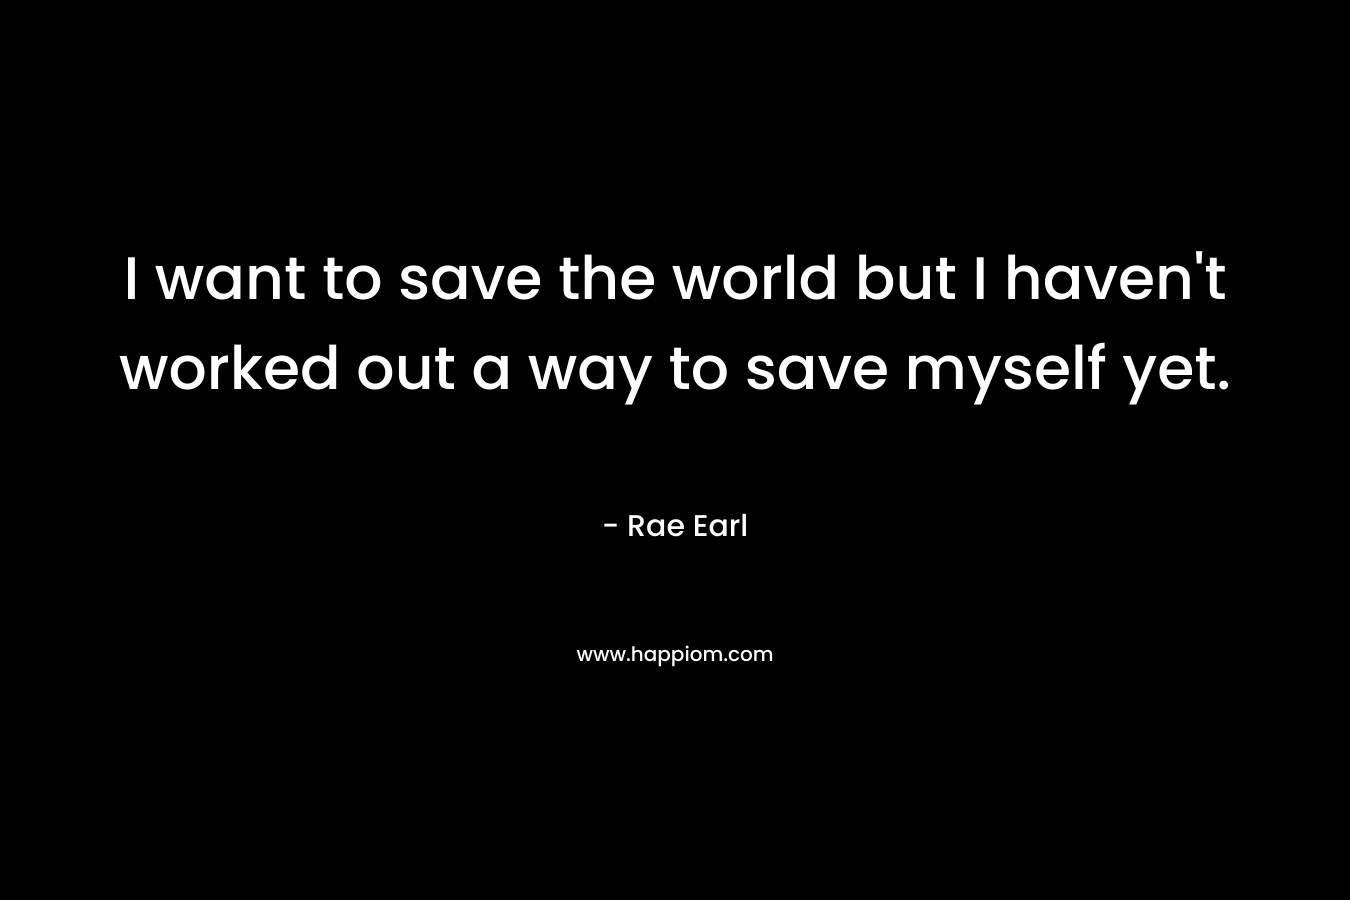 I want to save the world but I haven't worked out a way to save myself yet.